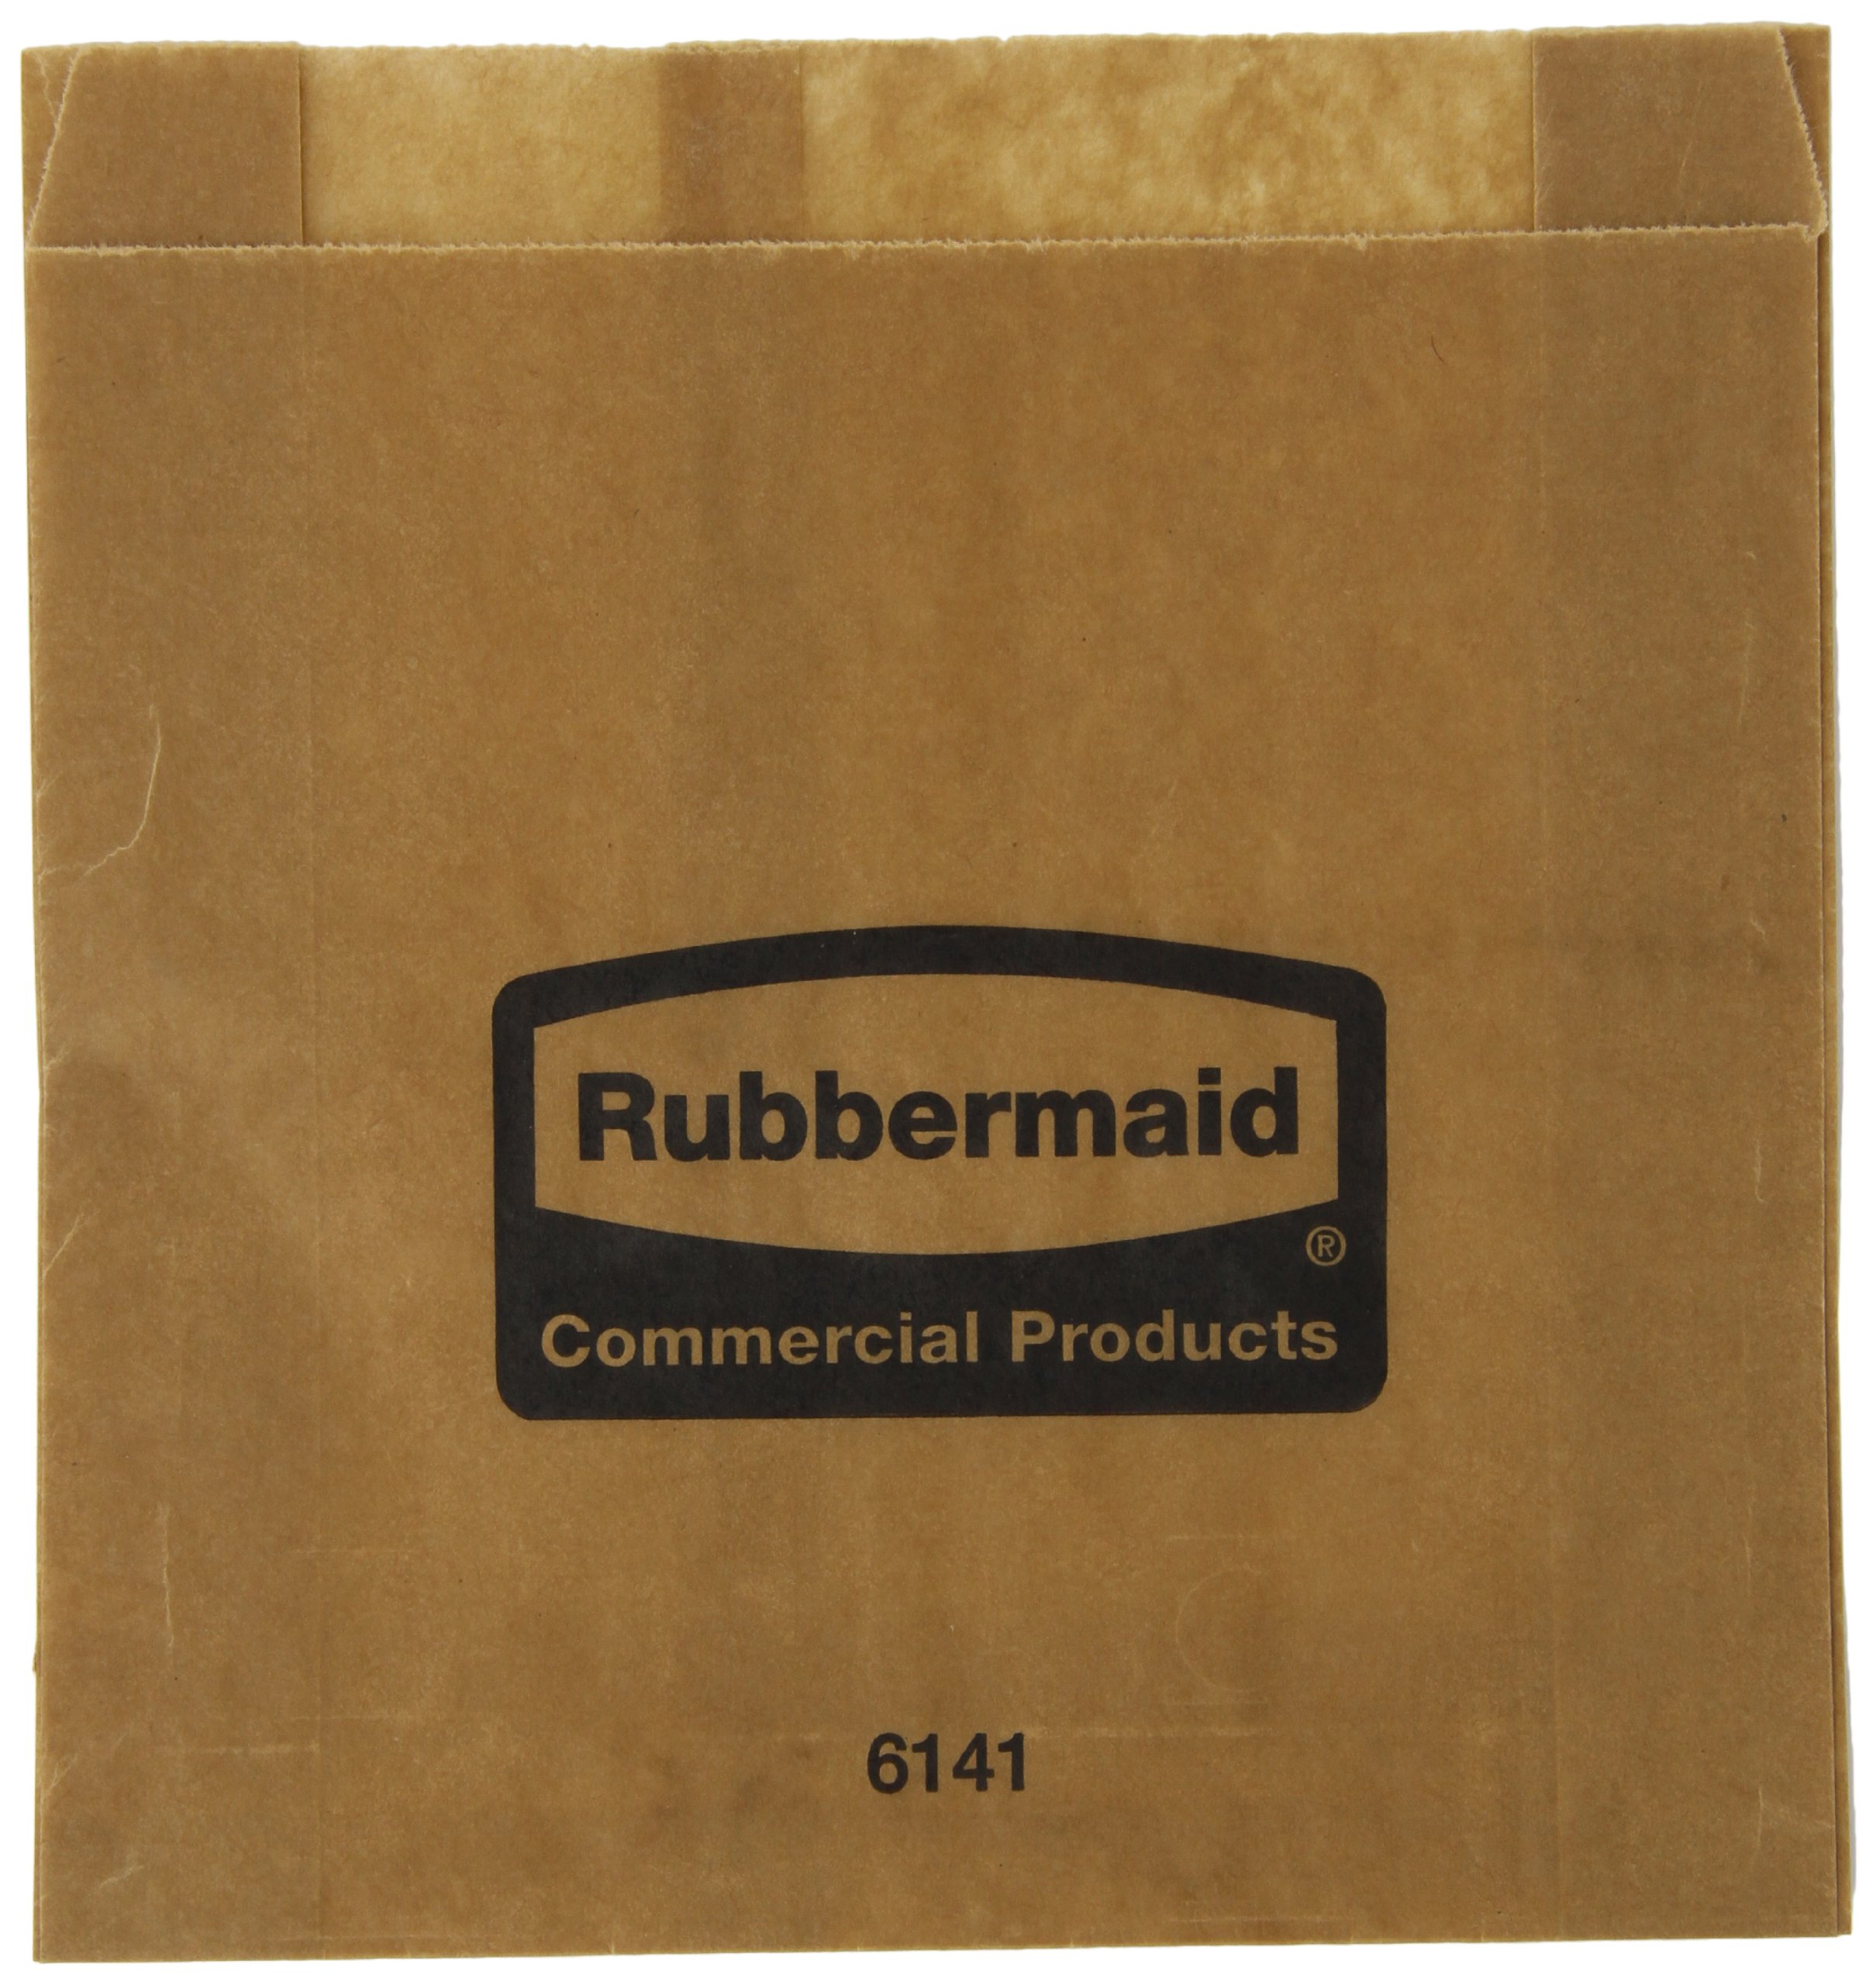 Rubbermaid Commercial Wax Paper Bags Sanitary Napkin Disposal Bags Feminine  Hygiene liners Pack of 250 250